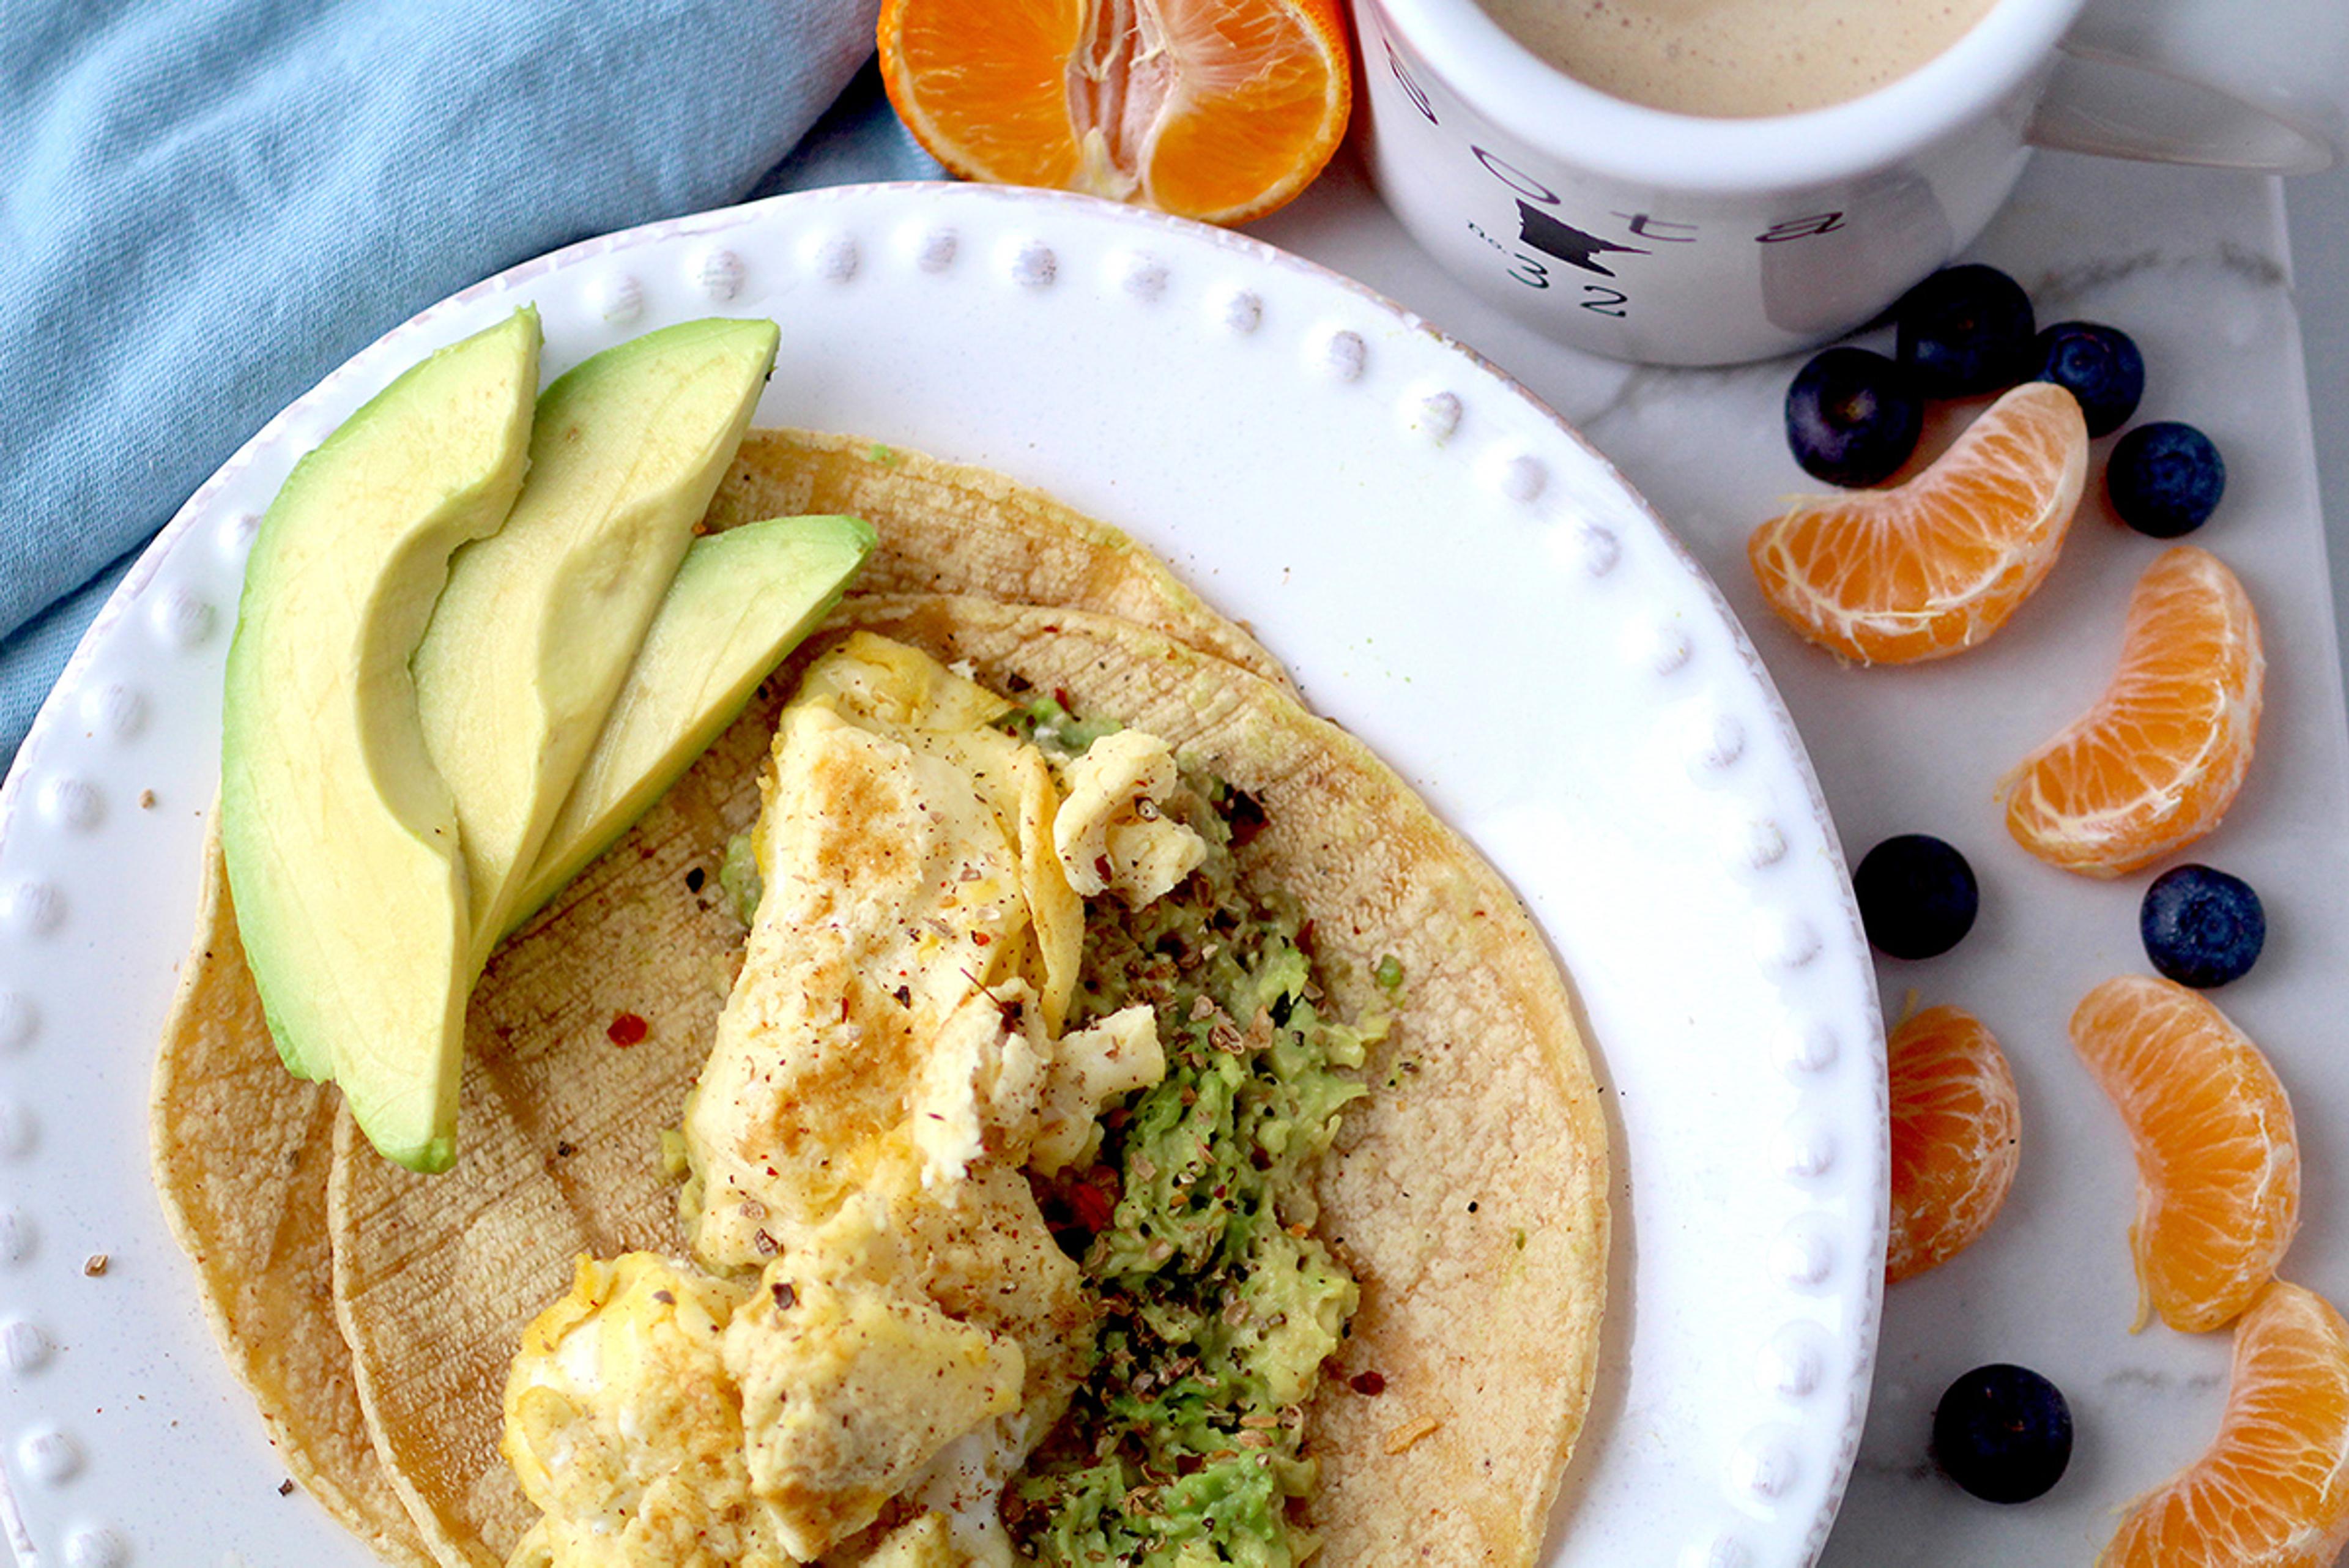 Avocado tortilla egg scramble served with fresh fruit and coffee.